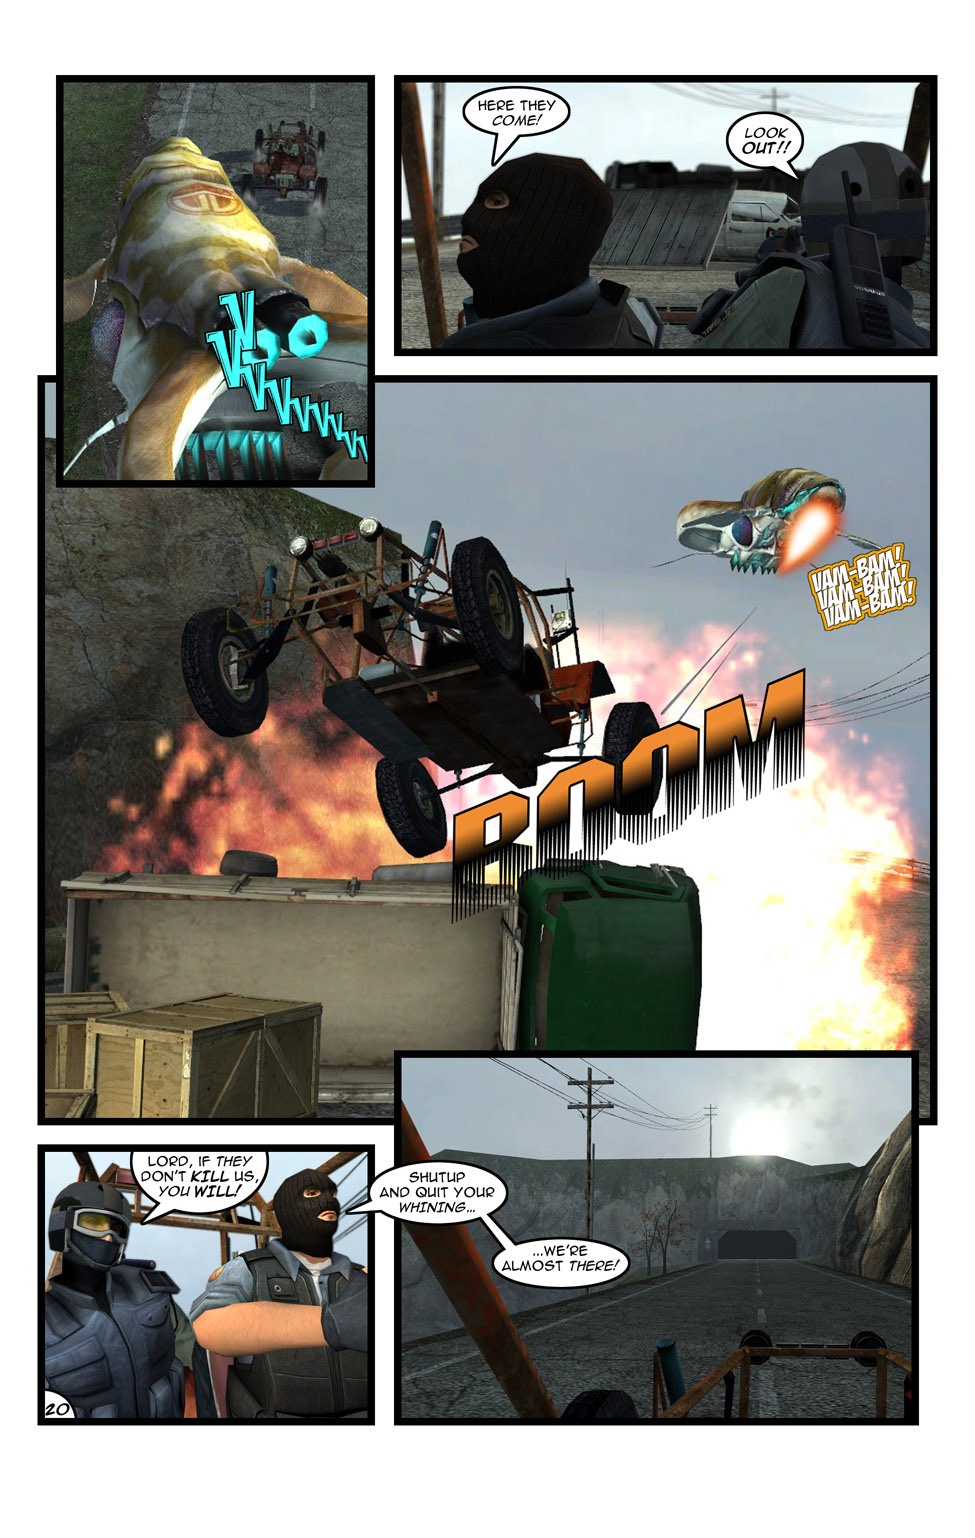 The gunship chases the fleeing buggy. Jack looks back at the gunship as Billy begs for him to look out. The buggy jumps a ramp as the gunship fires at them and blows up some dilapidated cars in the highway. As Billy complains that Jack will get them killed, Jack keeps driving towards a tunnel.